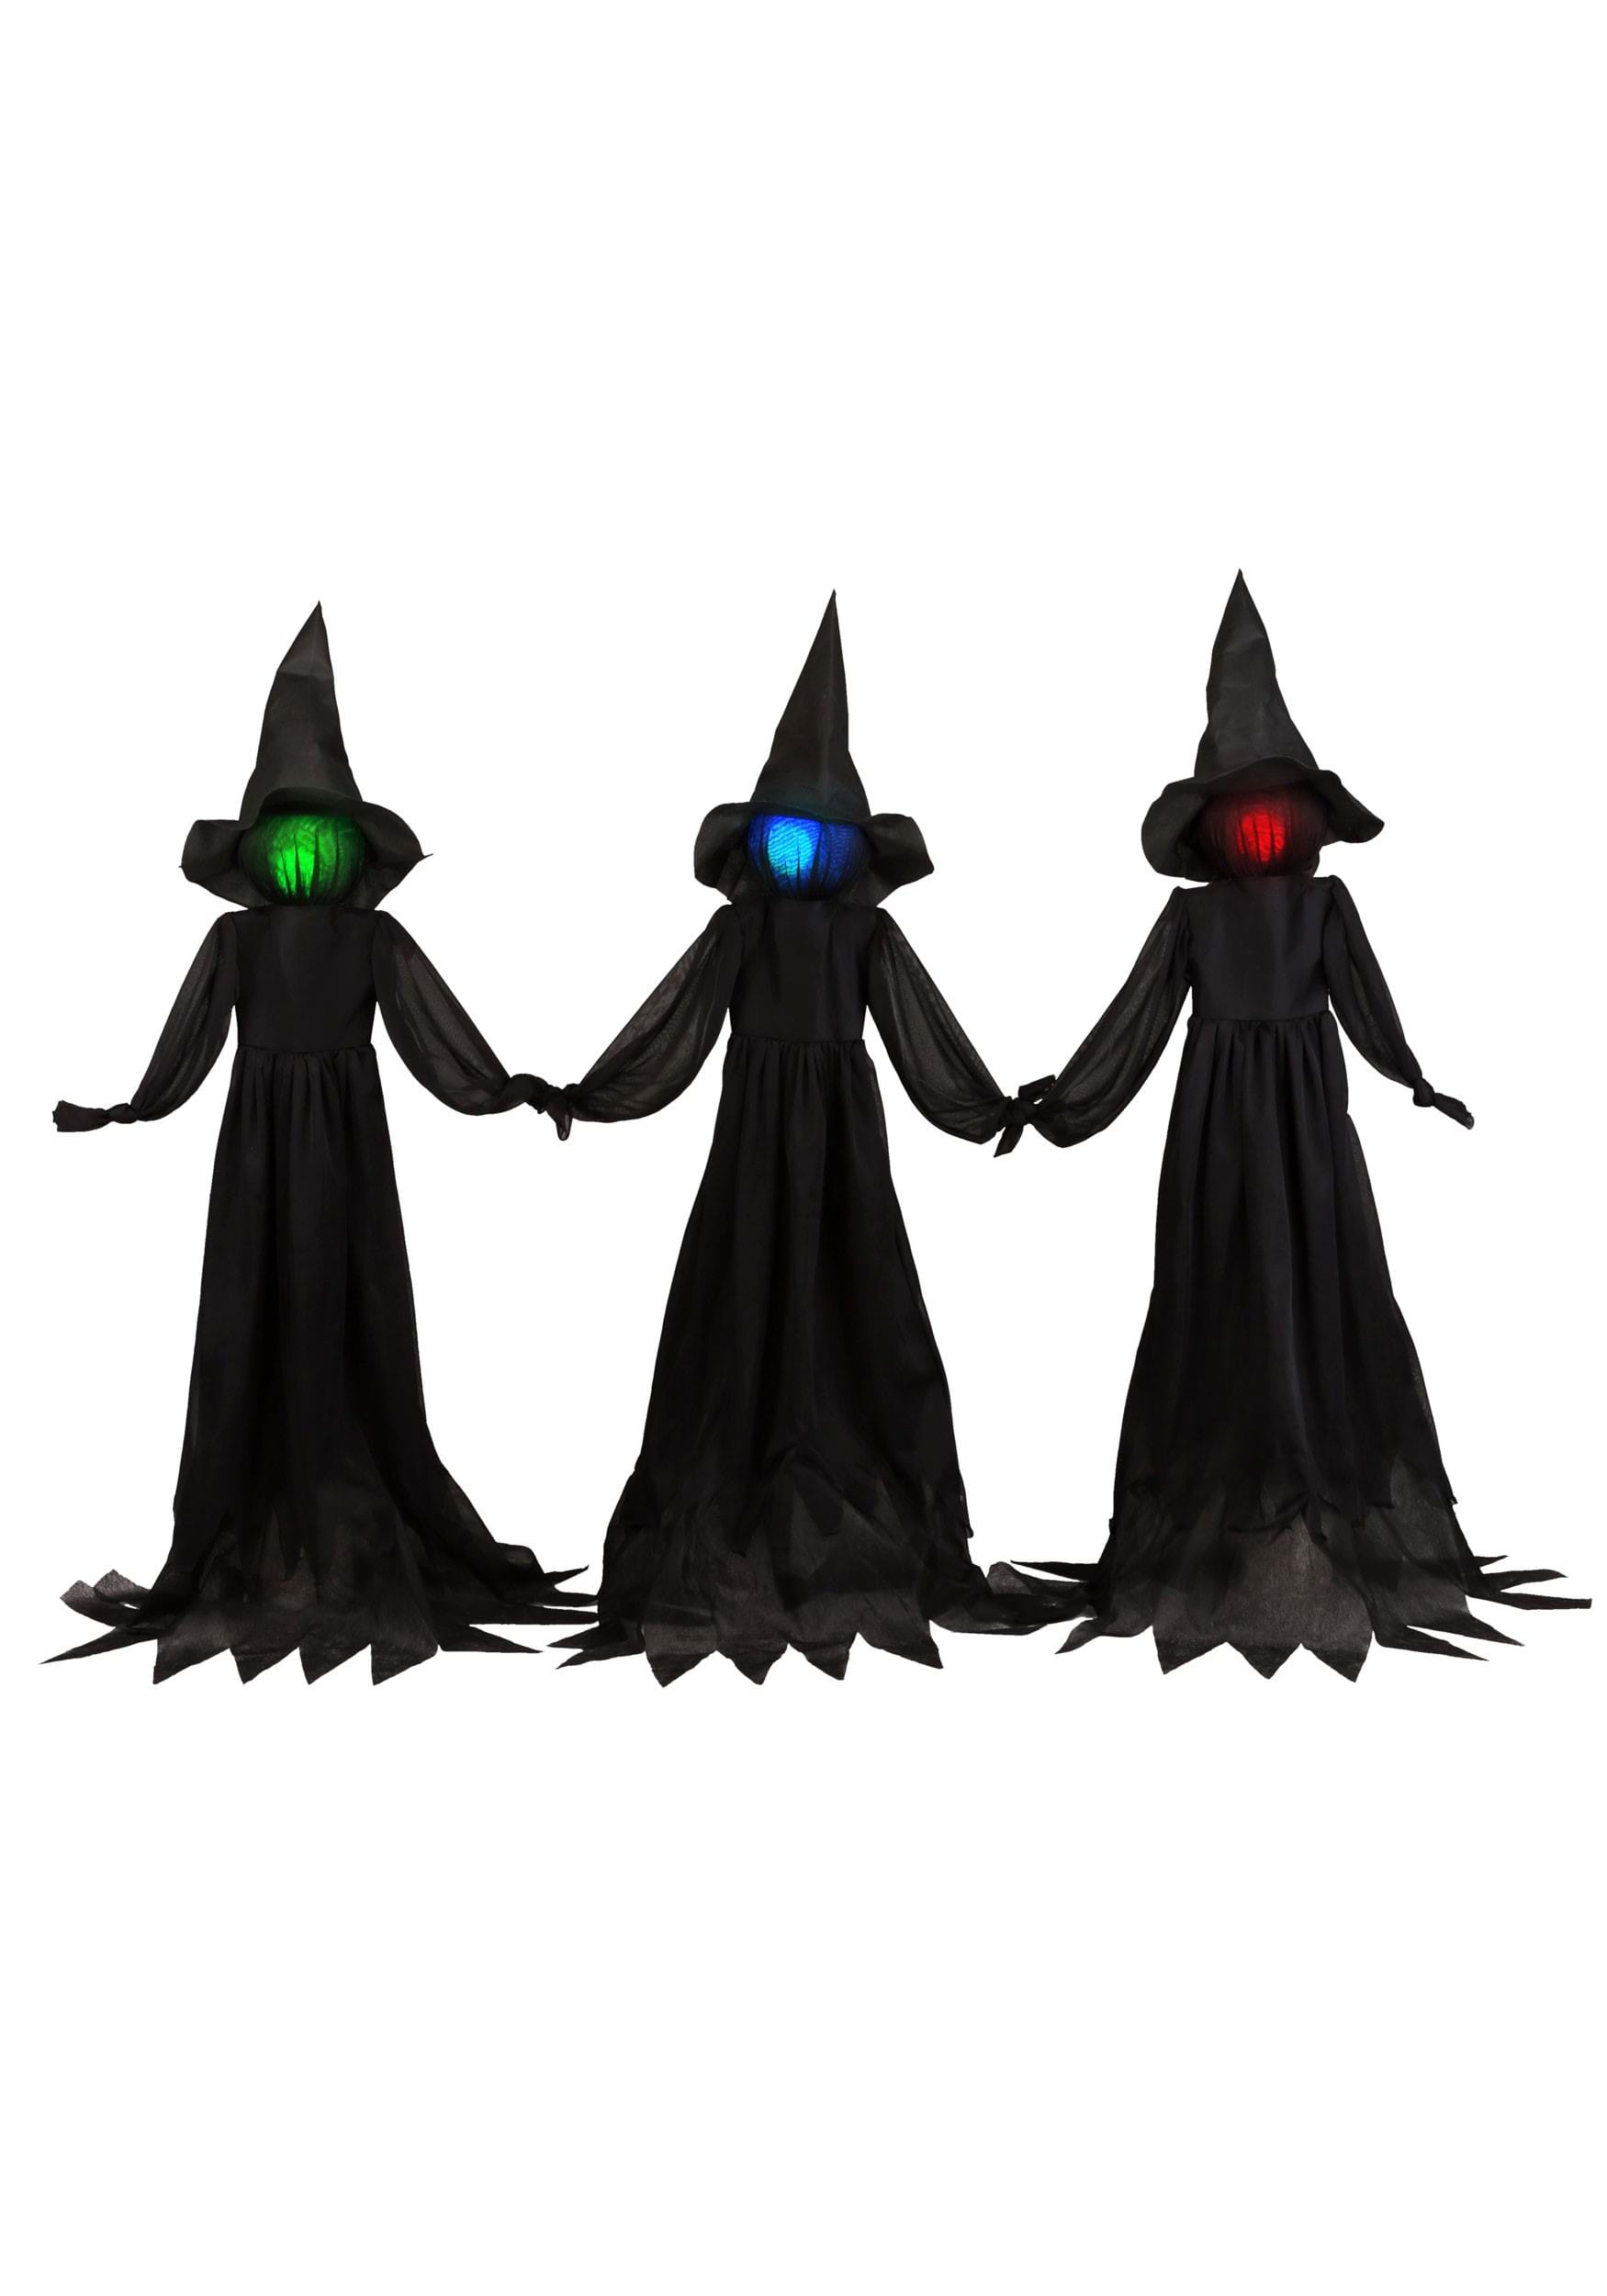 Photos - Other interior and decor FUN Costumes 4FT Holding Hands Witches Halloween Decoration Green/Blac